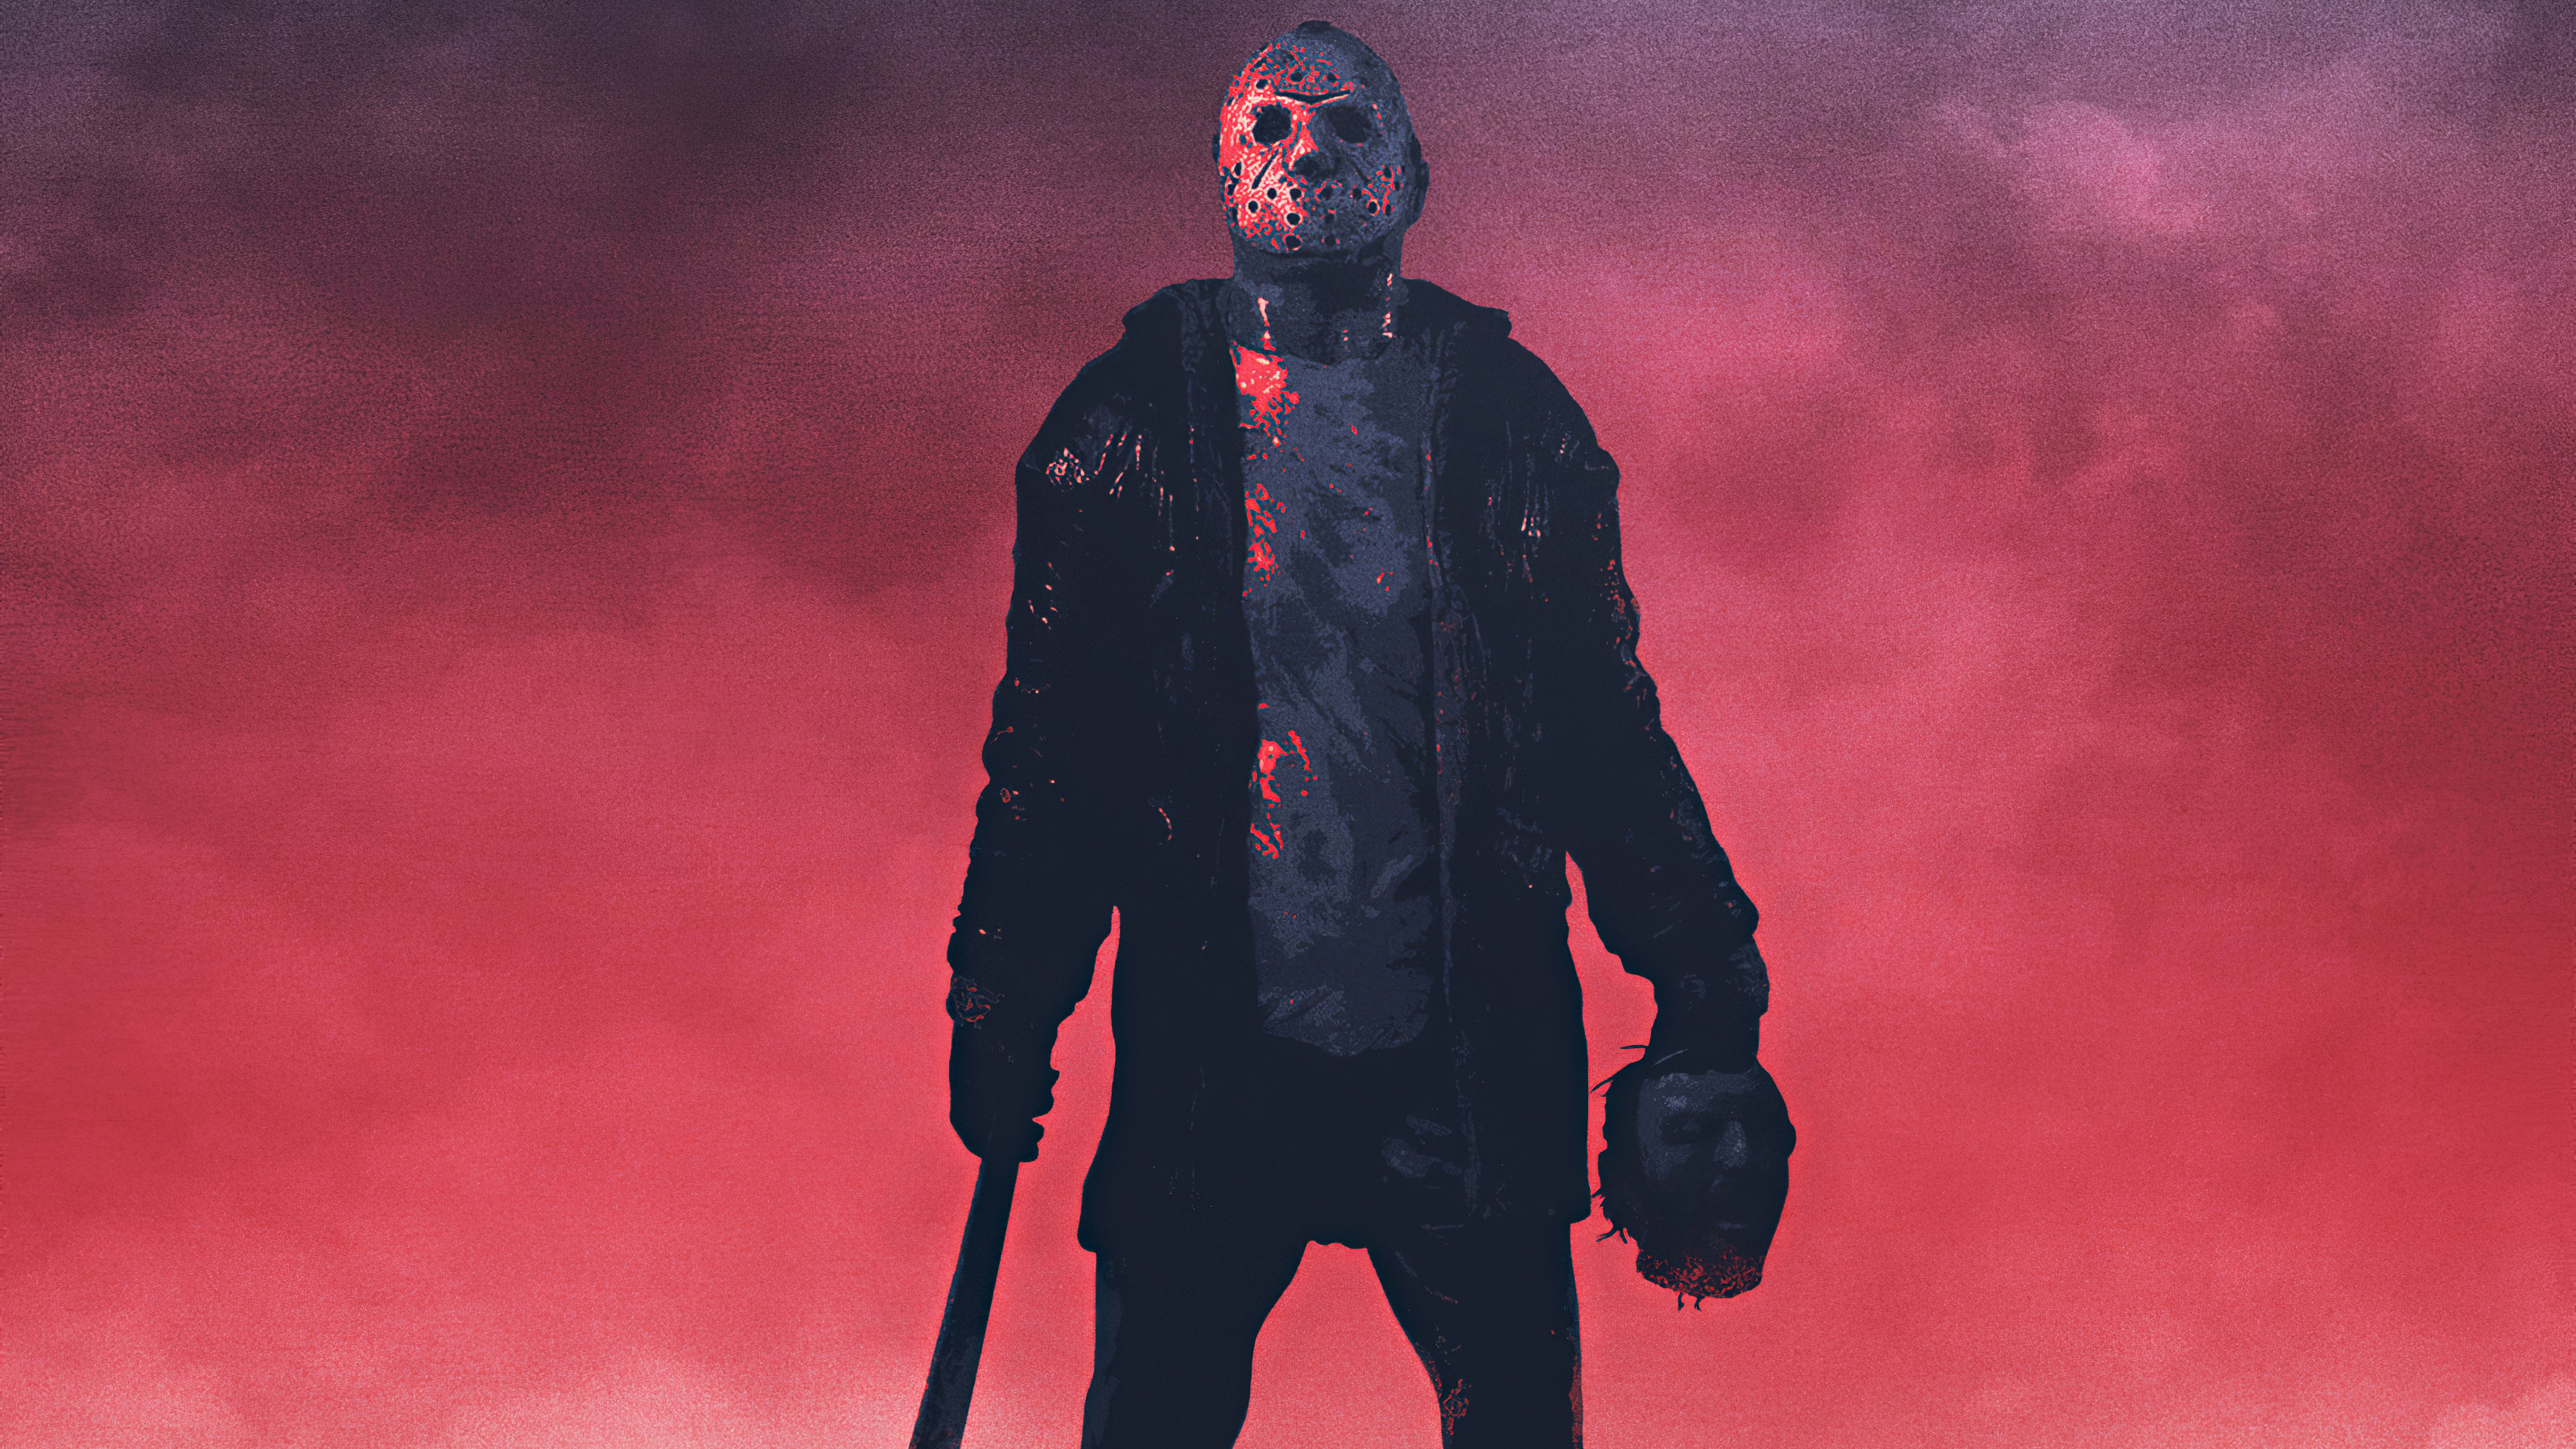 General 3200x1800 Friday the 13th: The Game video game art mask frontal view horror Horror movies red